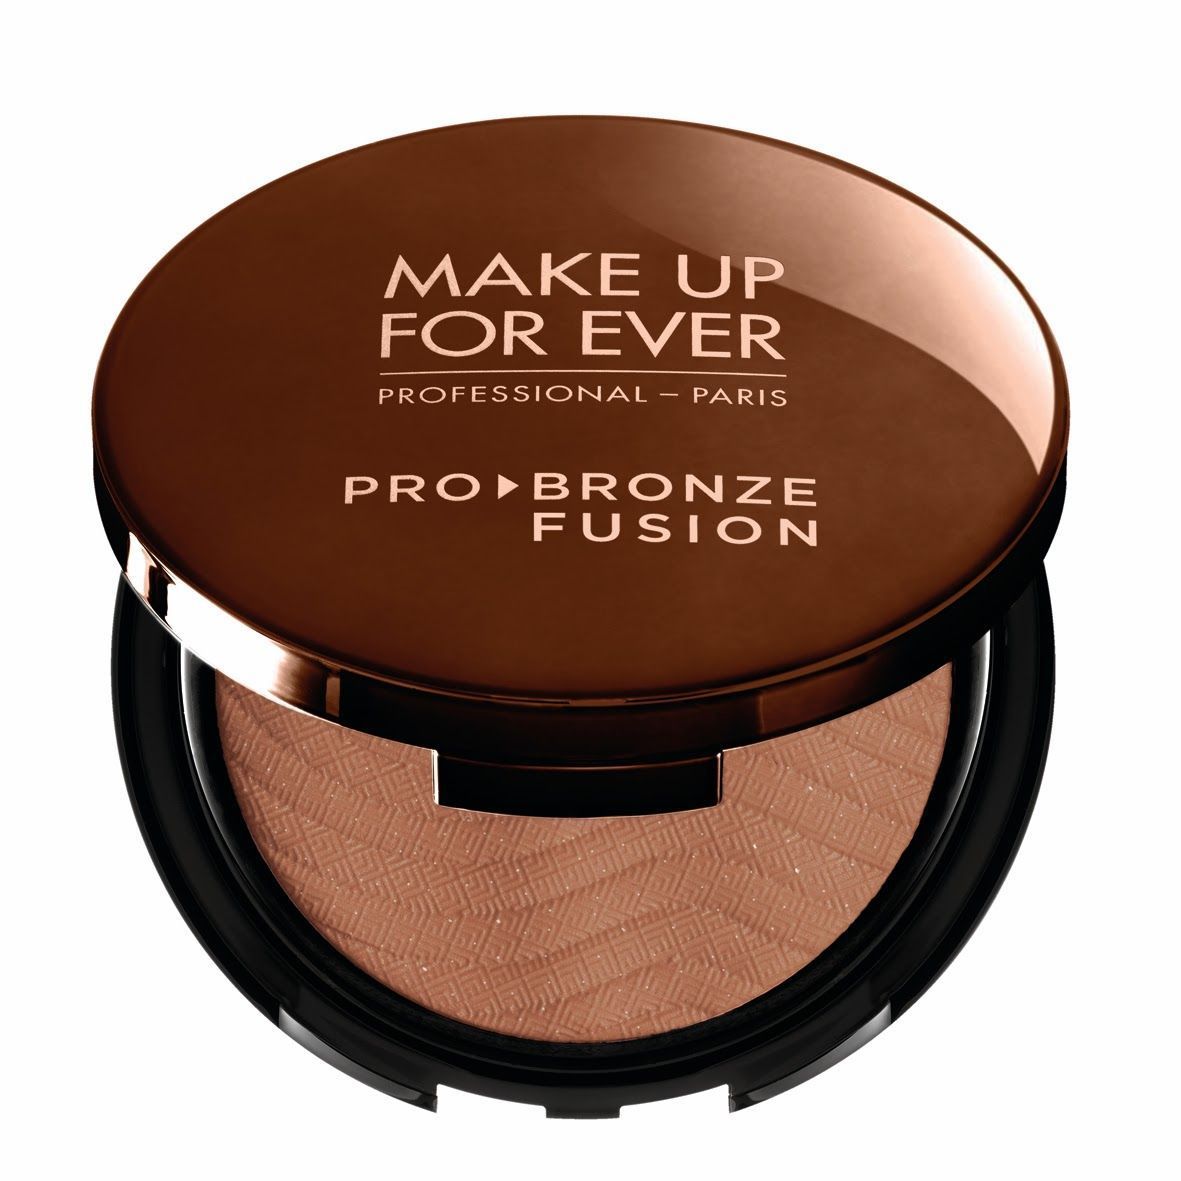 pro bronze fusion, make up for ever